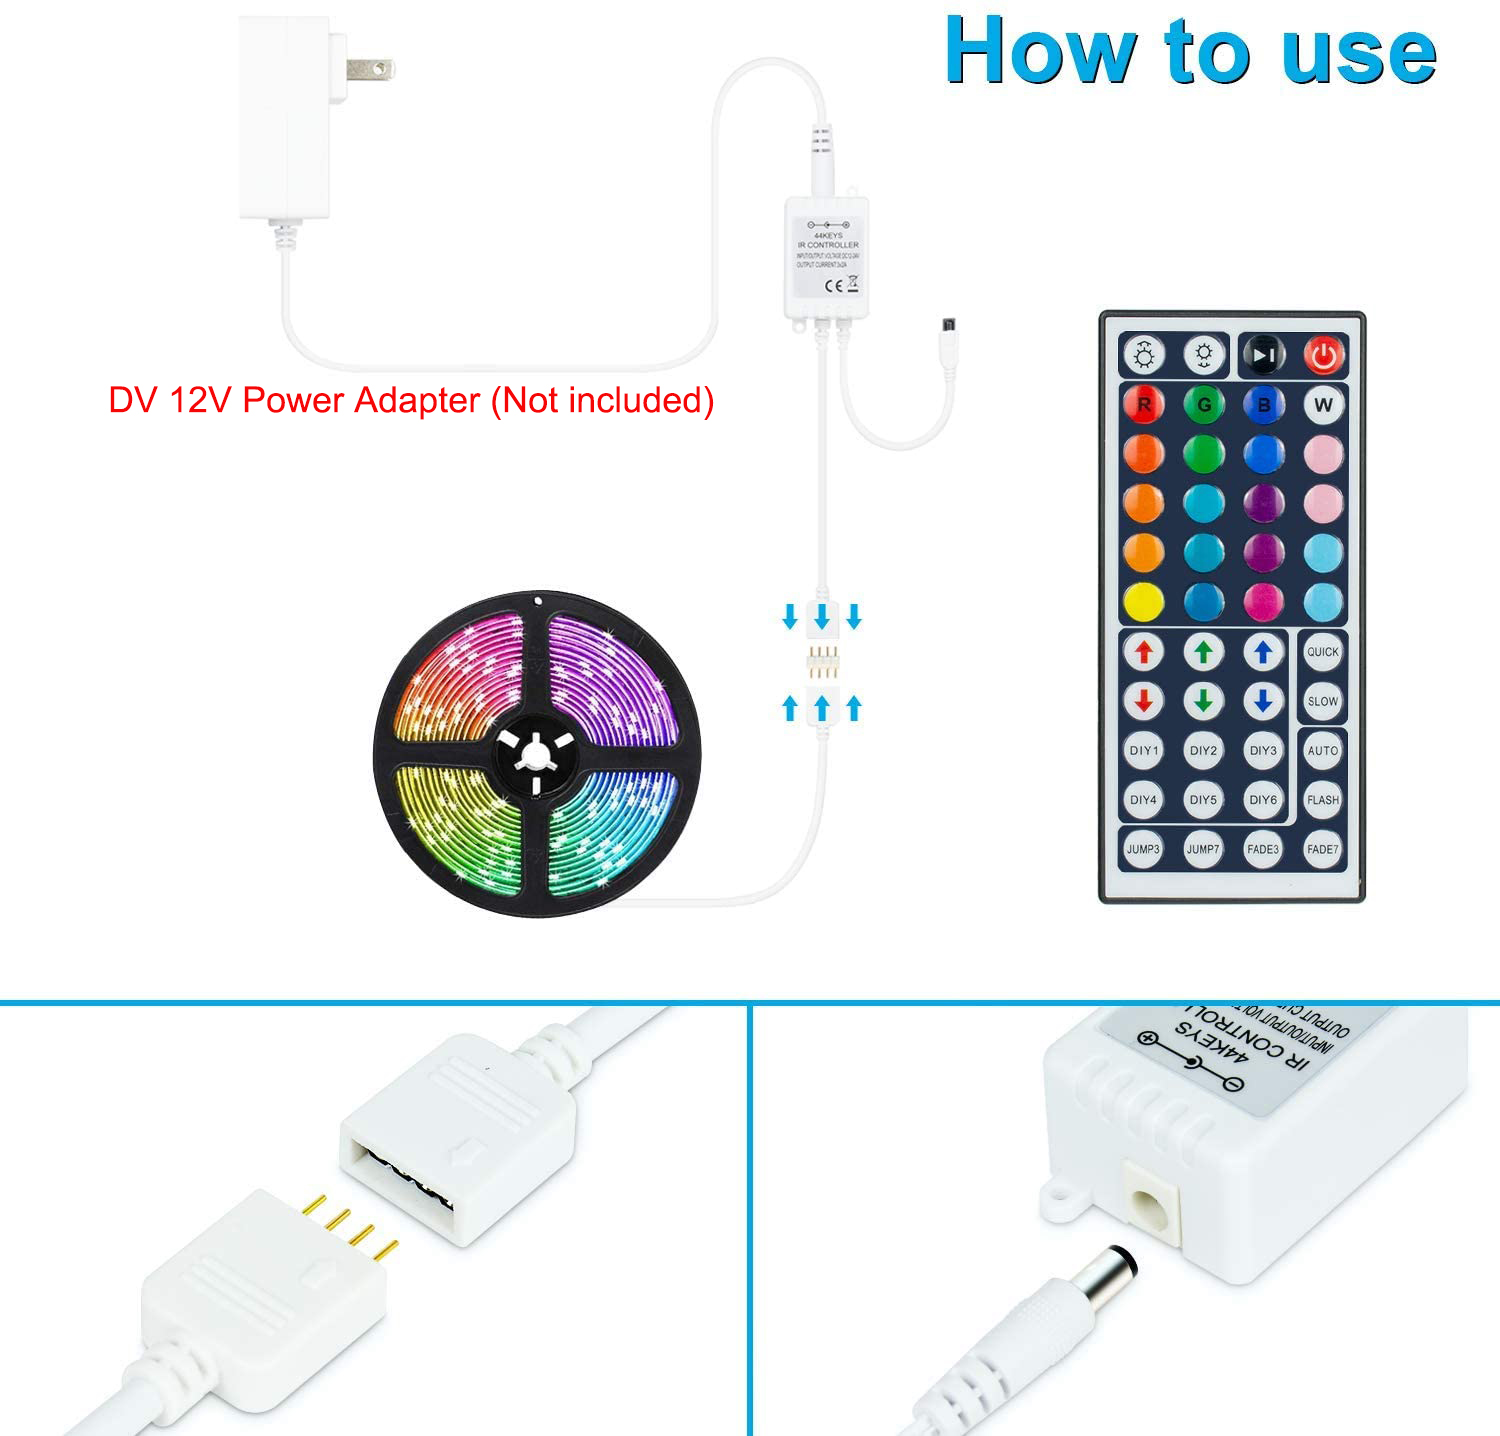 HF-MCLED44: Led Light Remote Controller Kit, 1-Port 44 Keys Wireless IR Remote with Receiver for RGB 5050 2835 LED Strip Lights - Click Image to Close